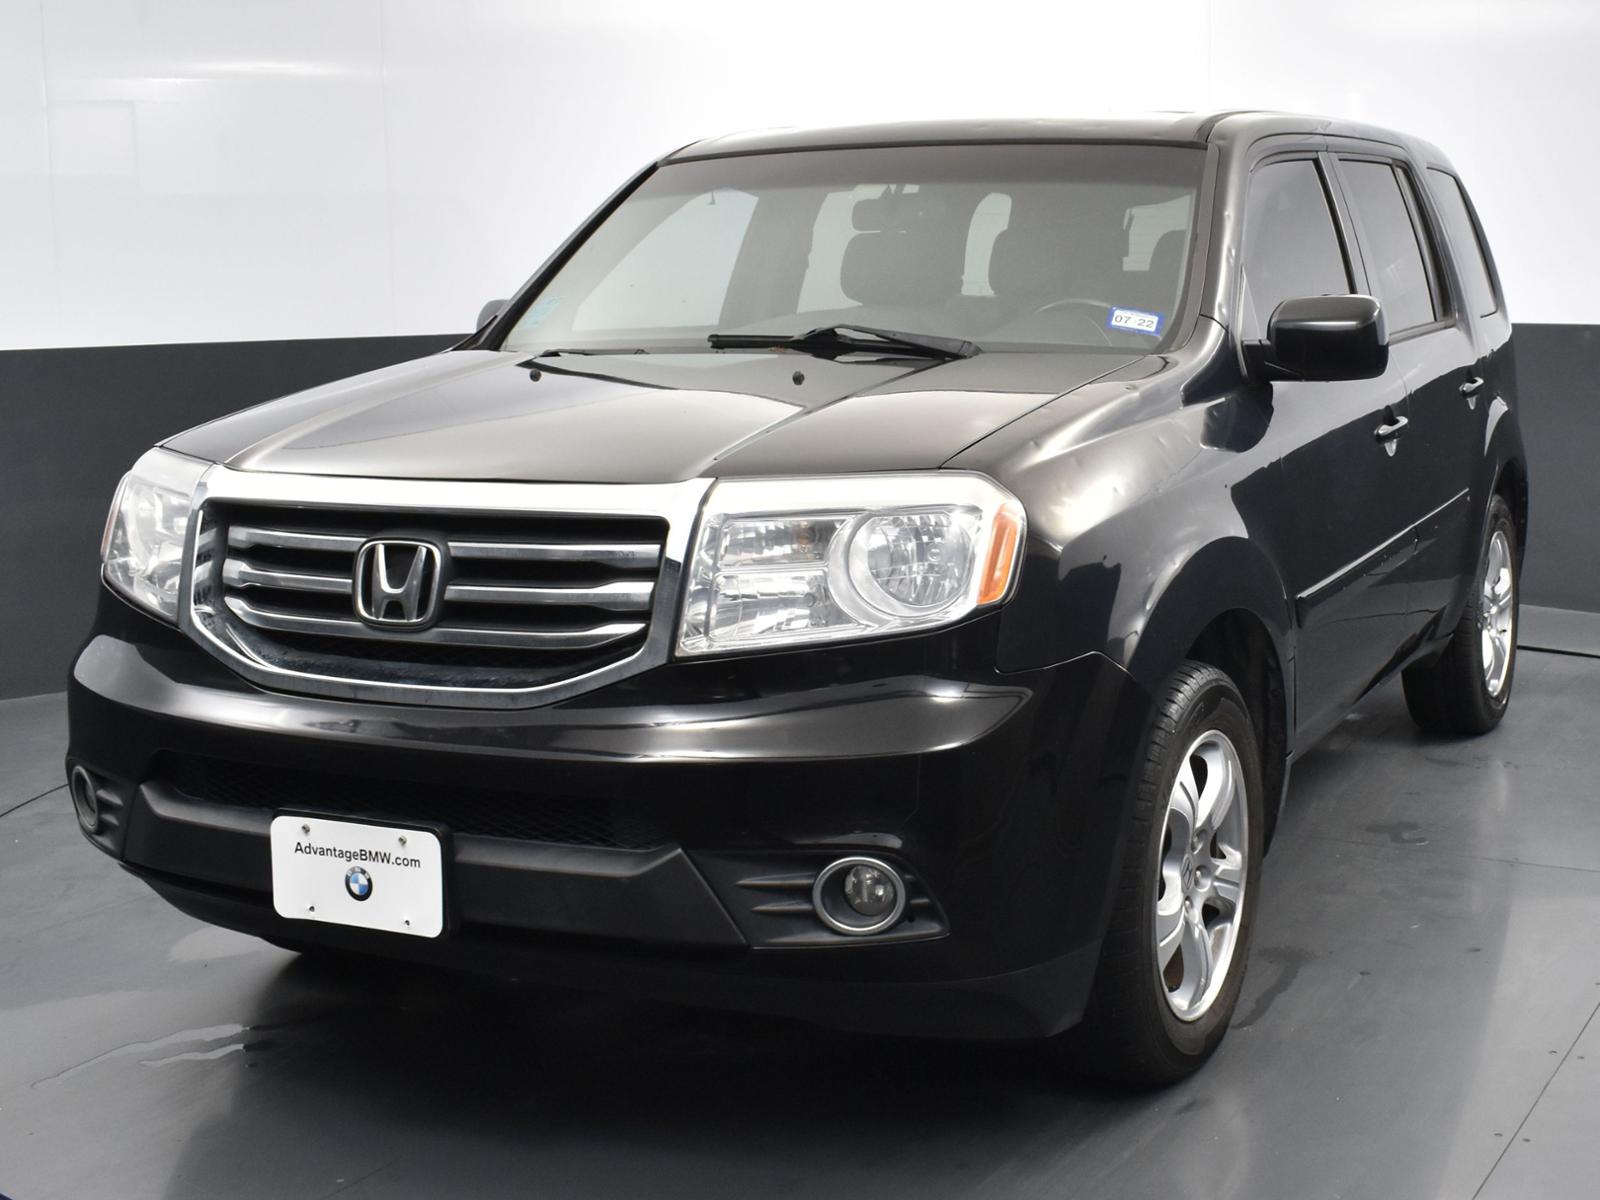 Pre-Owned 2013 Honda Pilot 2WD 4dr EX-L Sport Utility in Houston #DB032179  | Sterling McCall Hyundai